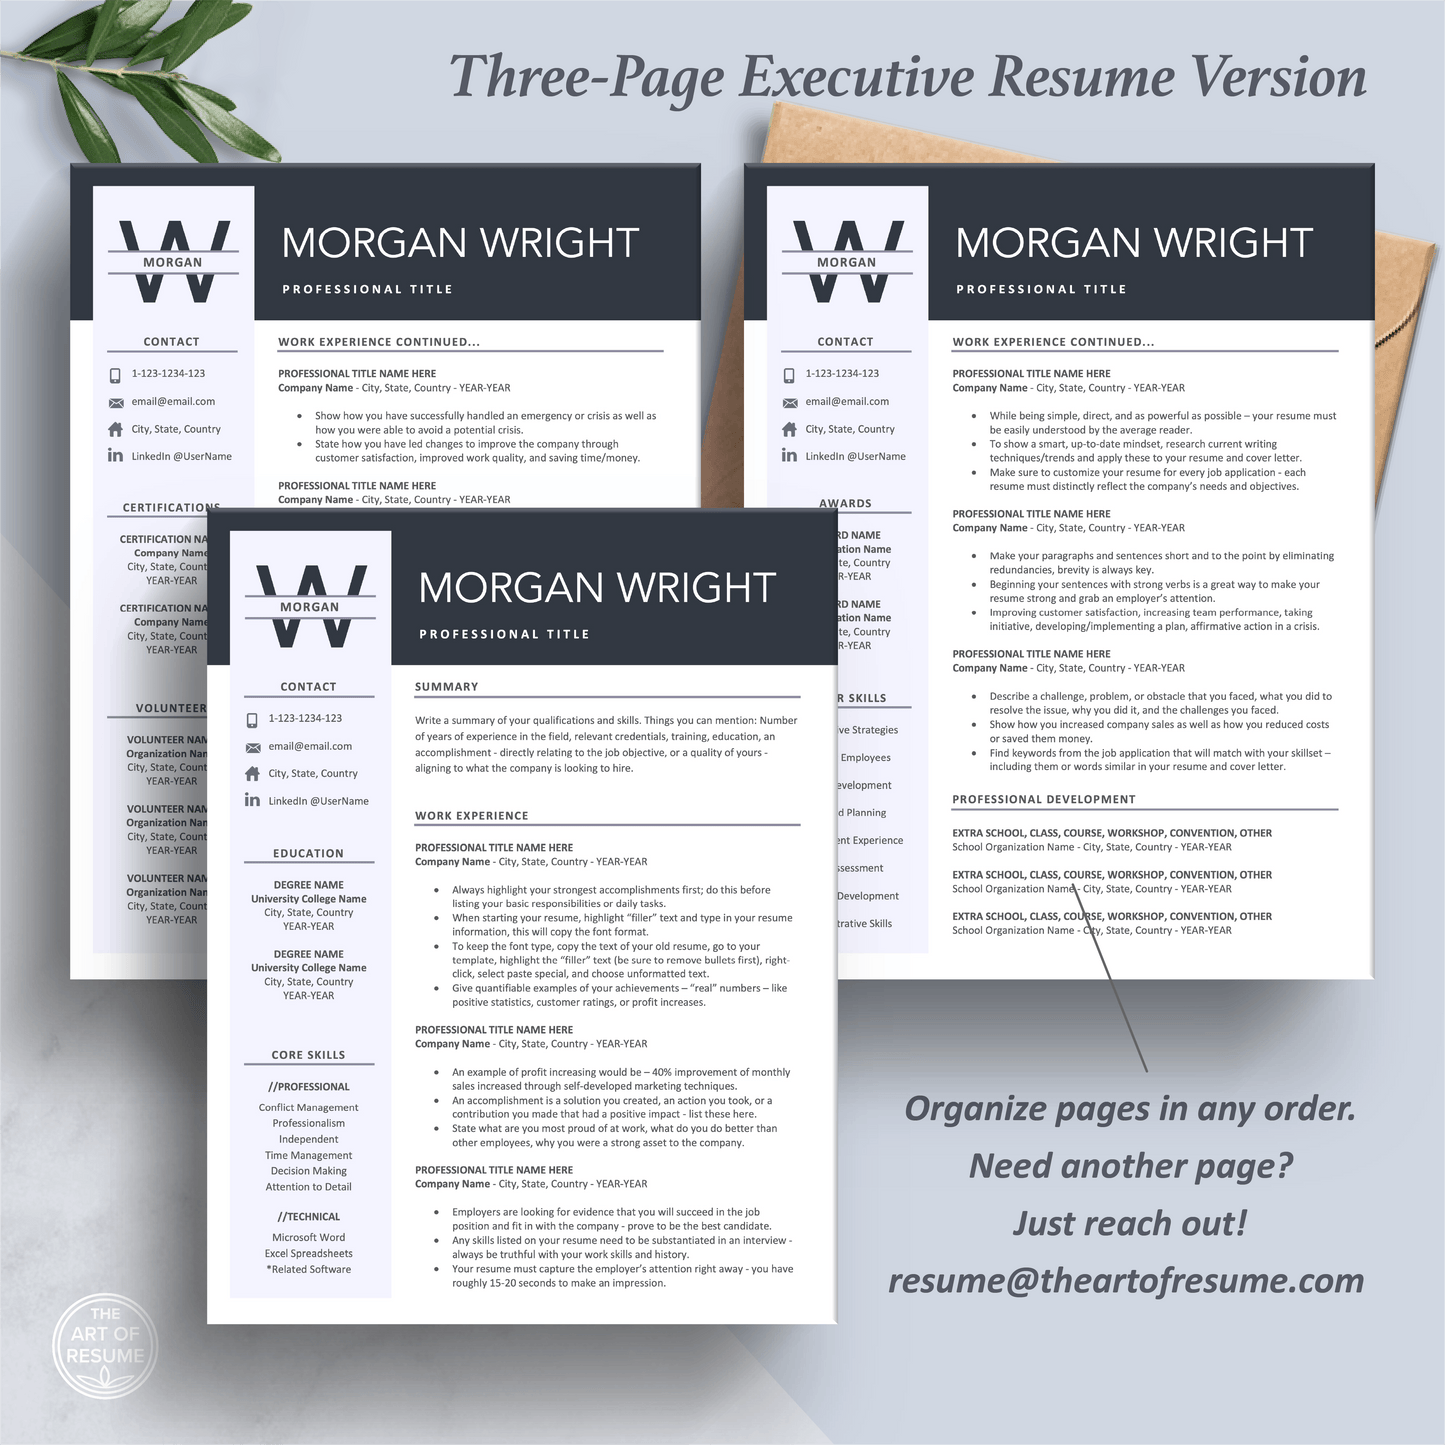 The Art of Resume Templates | Three-Page Professional Simple Executive CEO C-Suite Level  Resume CV Template Format | Curriculum Vitae